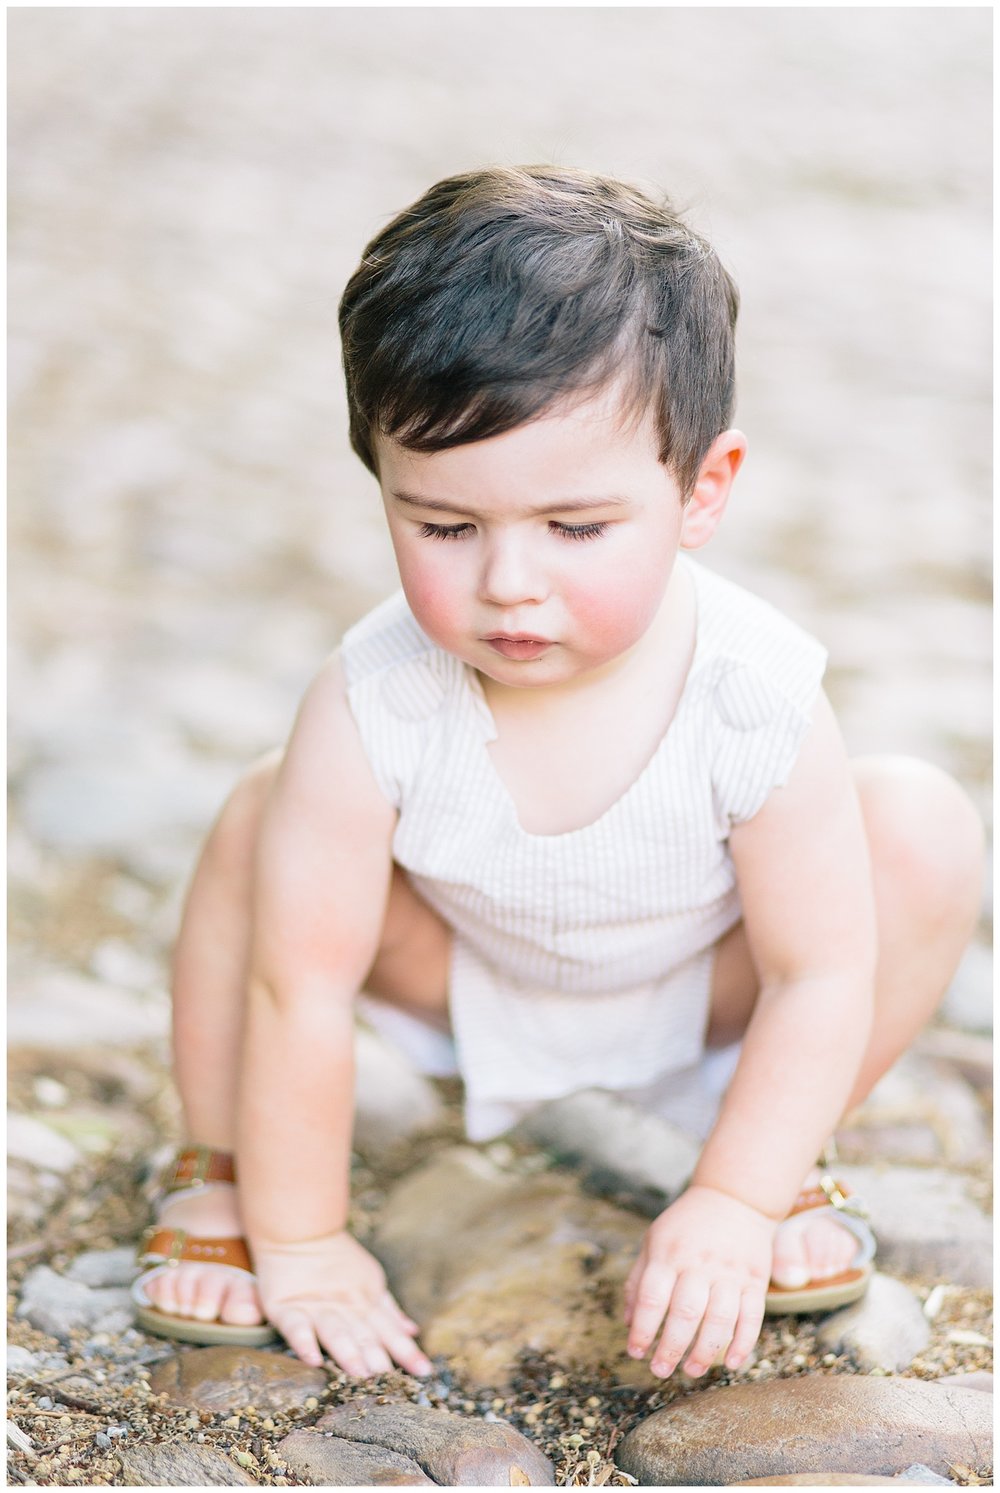 emily-belson-photography-old-town-alexandria-baby-02.jpg